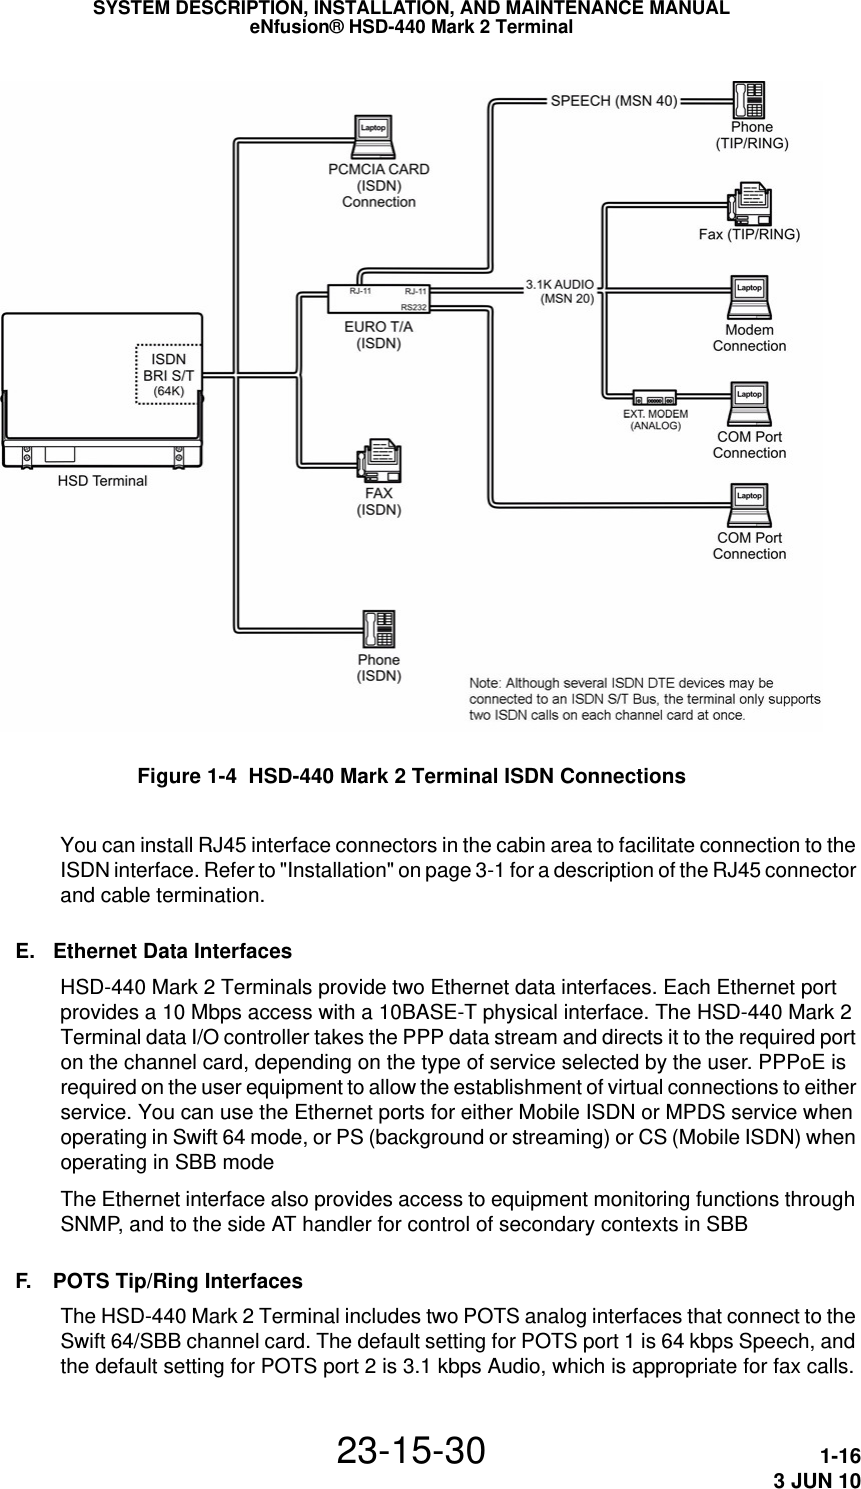 SYSTEM DESCRIPTION, INSTALLATION, AND MAINTENANCE MANUALeNfusion® HSD-440 Mark 2 Terminal23-15-30 1-163 JUN 10Figure 1-4  HSD-440 Mark 2 Terminal ISDN ConnectionsYou can install RJ45 interface connectors in the cabin area to facilitate connection to the ISDN interface. Refer to &quot;Installation&quot; on page 3-1 for a description of the RJ45 connector and cable termination.E. Ethernet Data InterfacesHSD-440 Mark 2 Terminals provide two Ethernet data interfaces. Each Ethernet port provides a 10 Mbps access with a 10BASE-T physical interface. The HSD-440 Mark 2 Terminal data I/O controller takes the PPP data stream and directs it to the required port on the channel card, depending on the type of service selected by the user. PPPoE is required on the user equipment to allow the establishment of virtual connections to either service. You can use the Ethernet ports for either Mobile ISDN or MPDS service when operating in Swift 64 mode, or PS (background or streaming) or CS (Mobile ISDN) when operating in SBB modeThe Ethernet interface also provides access to equipment monitoring functions through SNMP, and to the side AT handler for control of secondary contexts in SBBF. POTS Tip/Ring InterfacesThe HSD-440 Mark 2 Terminal includes two POTS analog interfaces that connect to the Swift 64/SBB channel card. The default setting for POTS port 1 is 64 kbps Speech, and the default setting for POTS port 2 is 3.1 kbps Audio, which is appropriate for fax calls. 